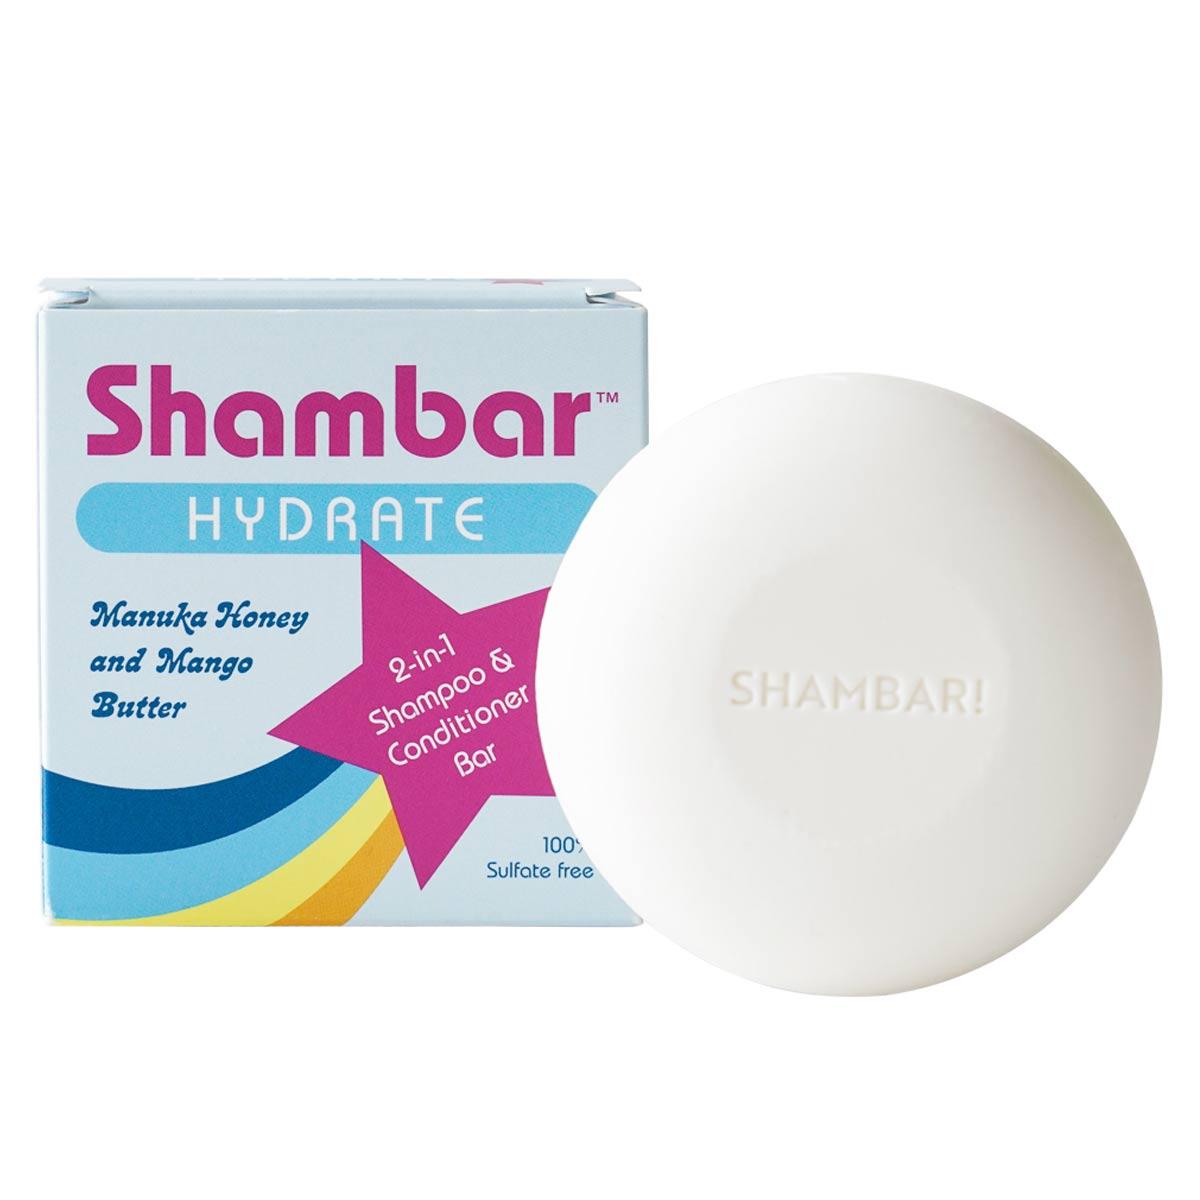 Primary image of Shampoo Bar Hydrate